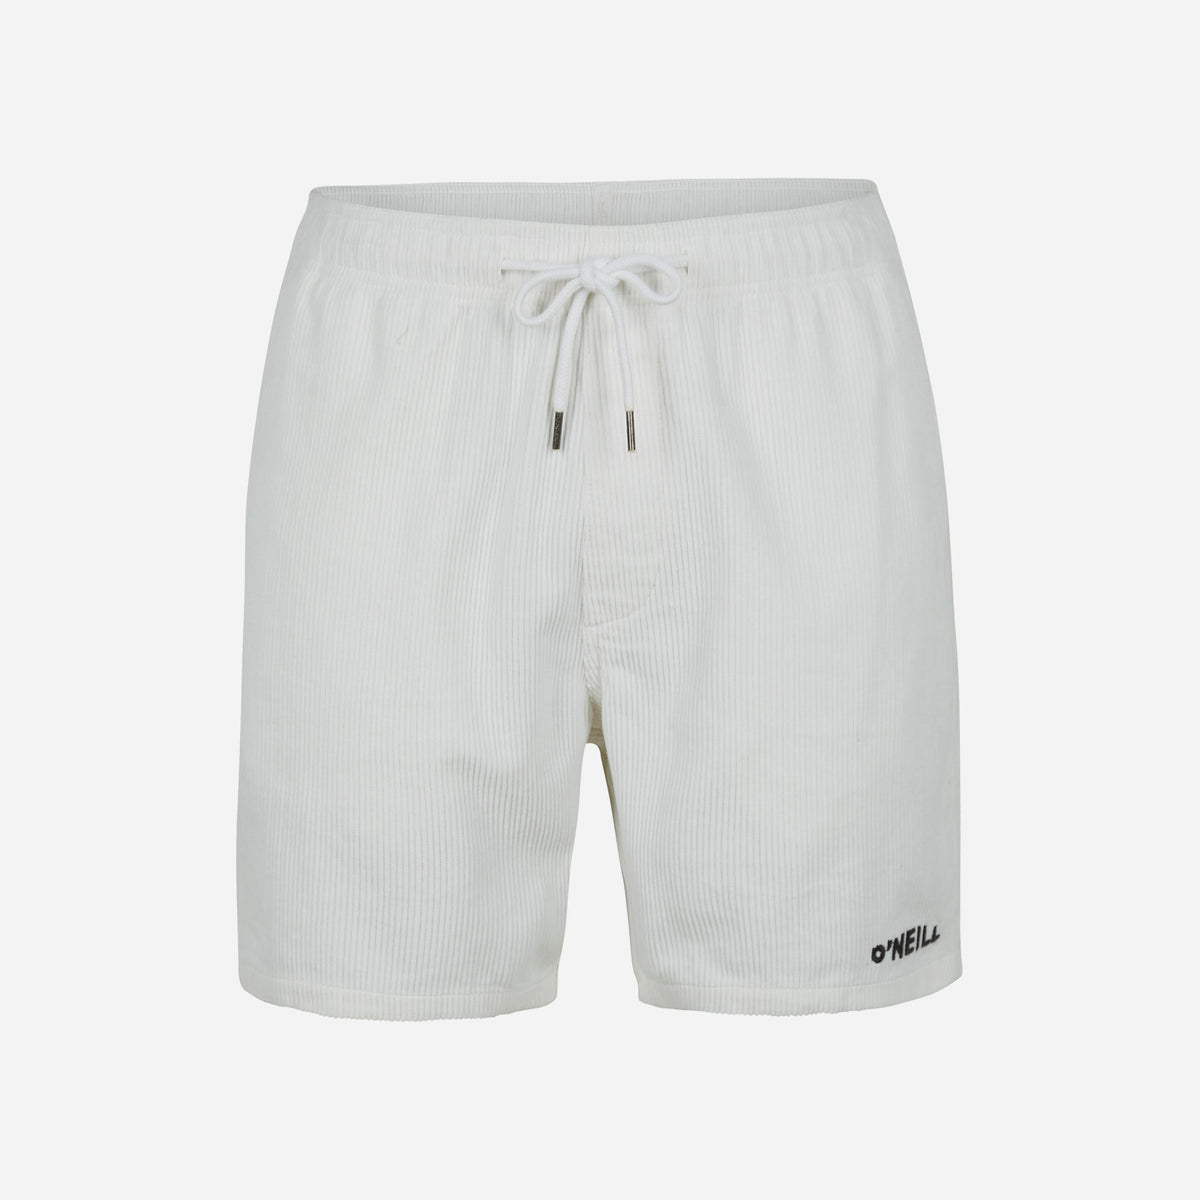 Supersports VN | Men's Oneill Camorro Cord Shorts